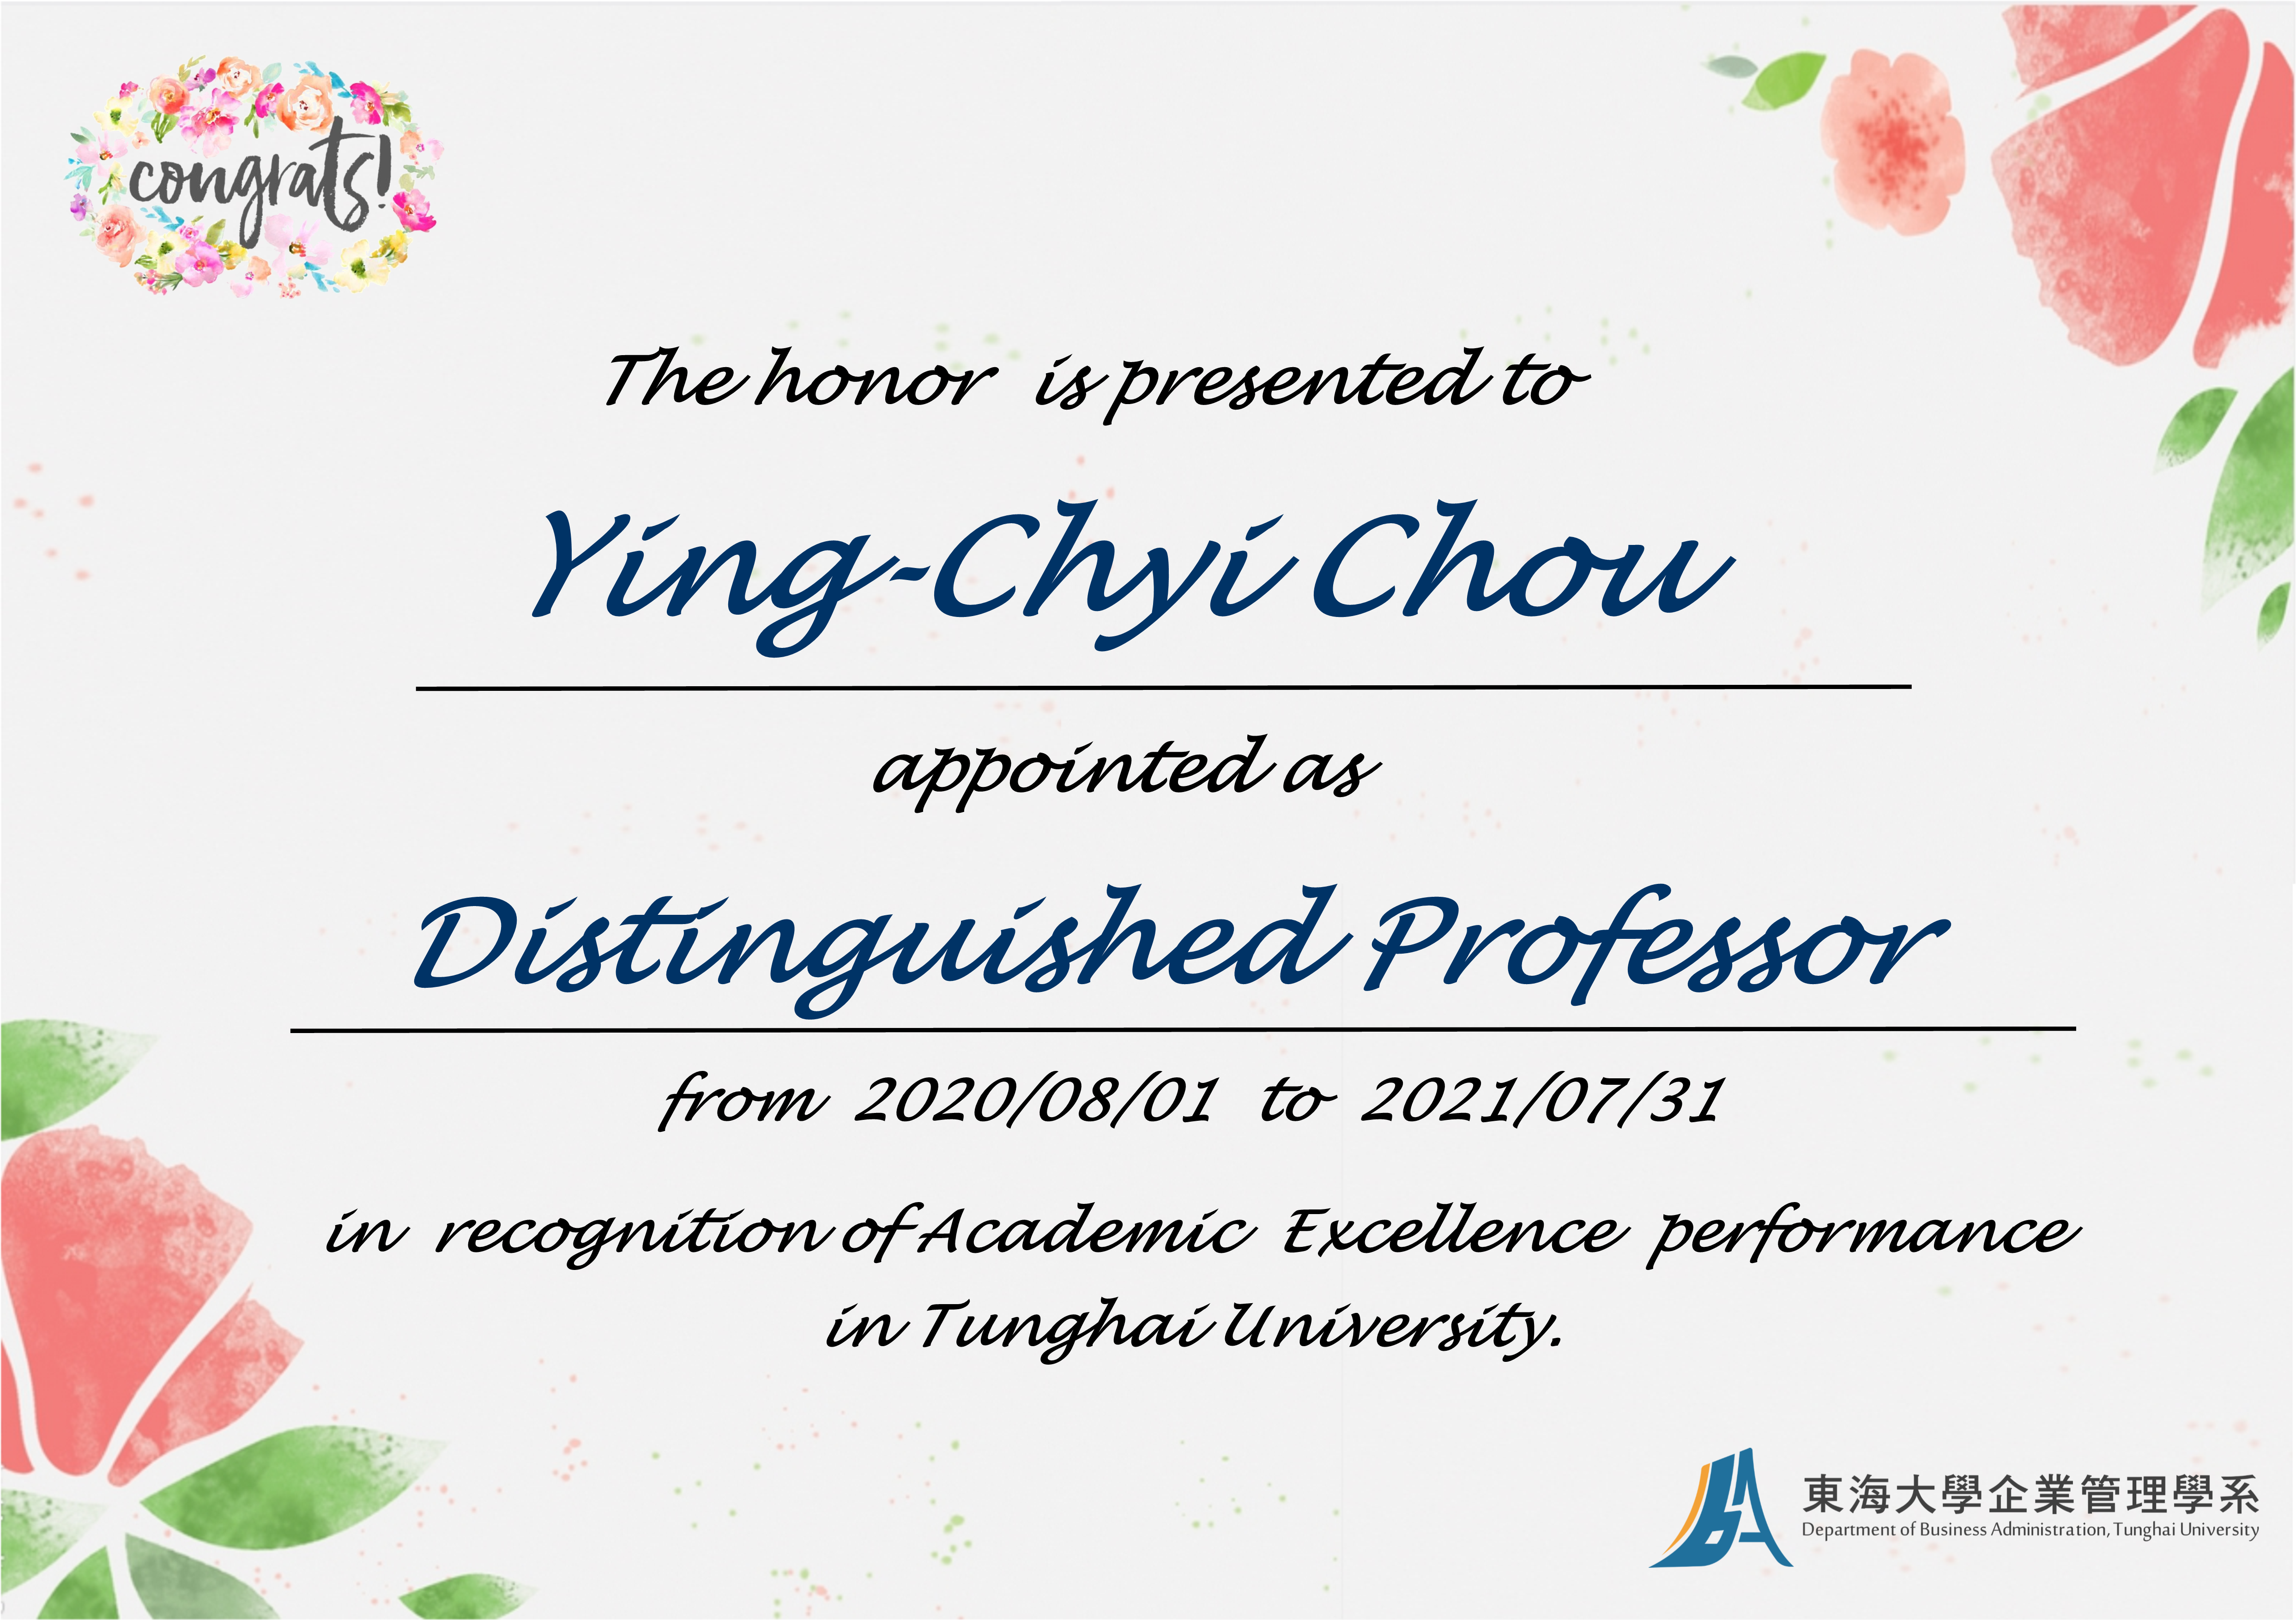 Congratulations！The honor is presented to Ying-Chyi Chou appointed as a Distinguished Professor 